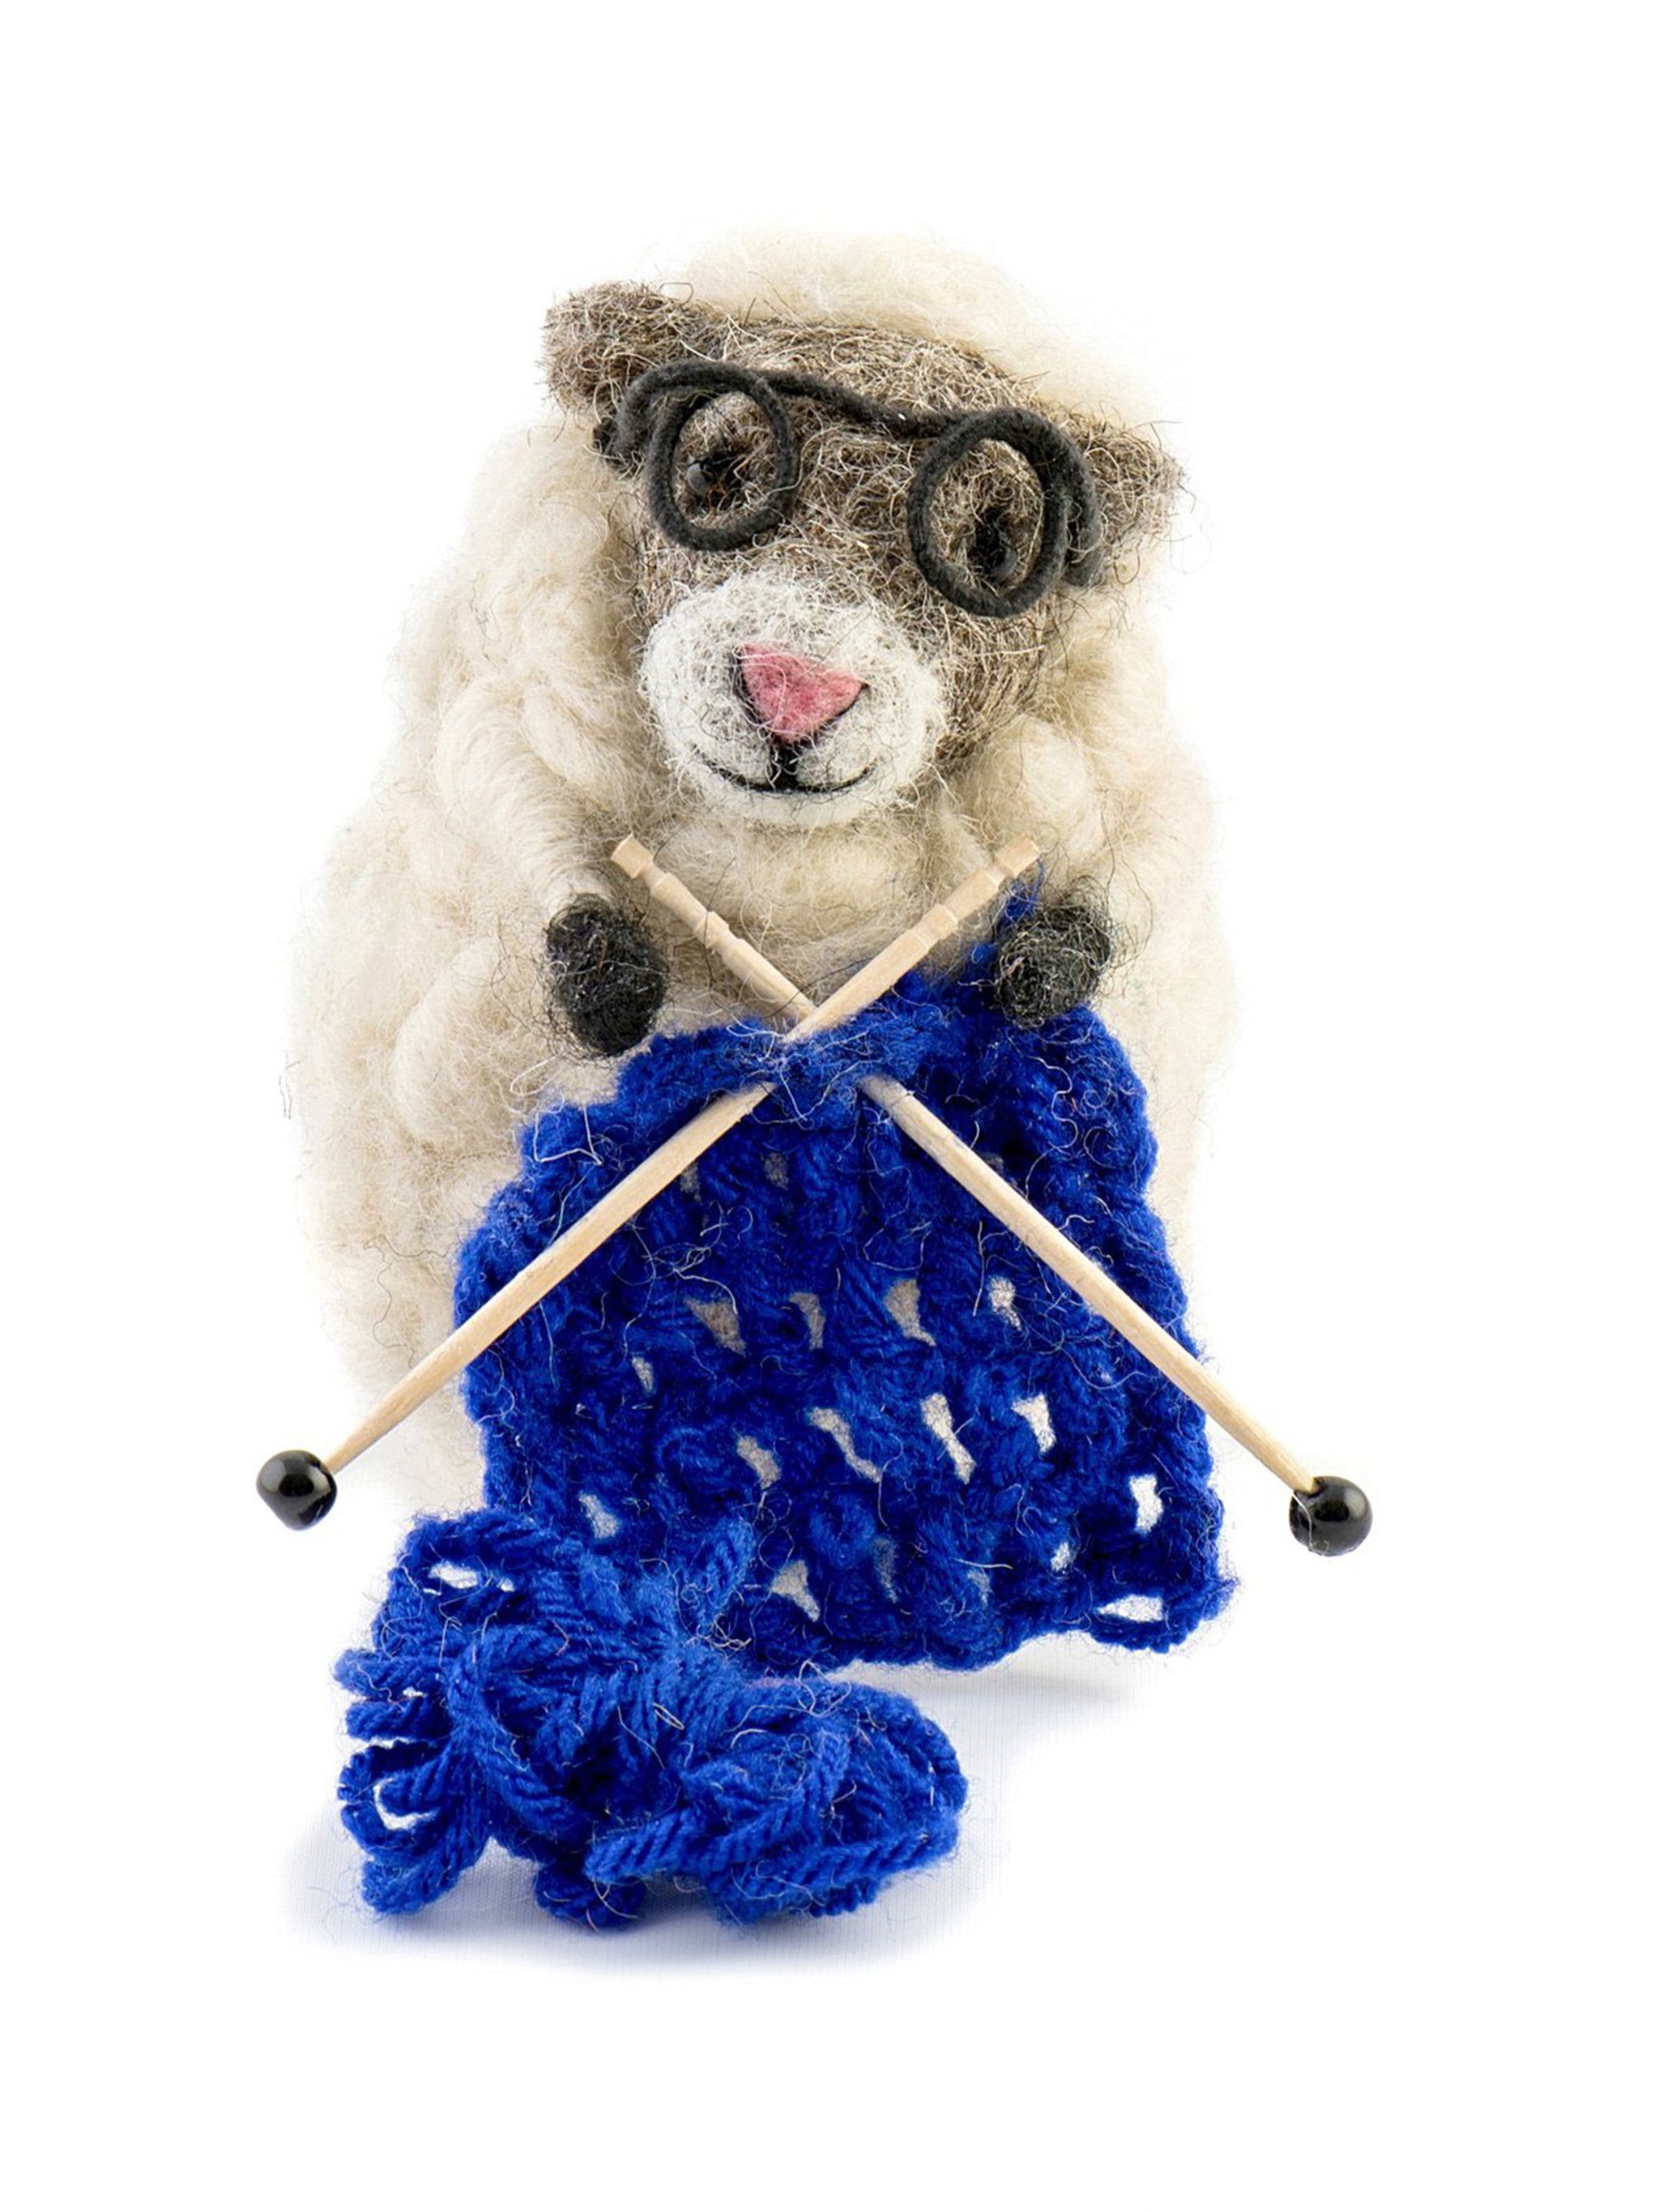 Knitting on TV: Louie - Sheep and Stitch